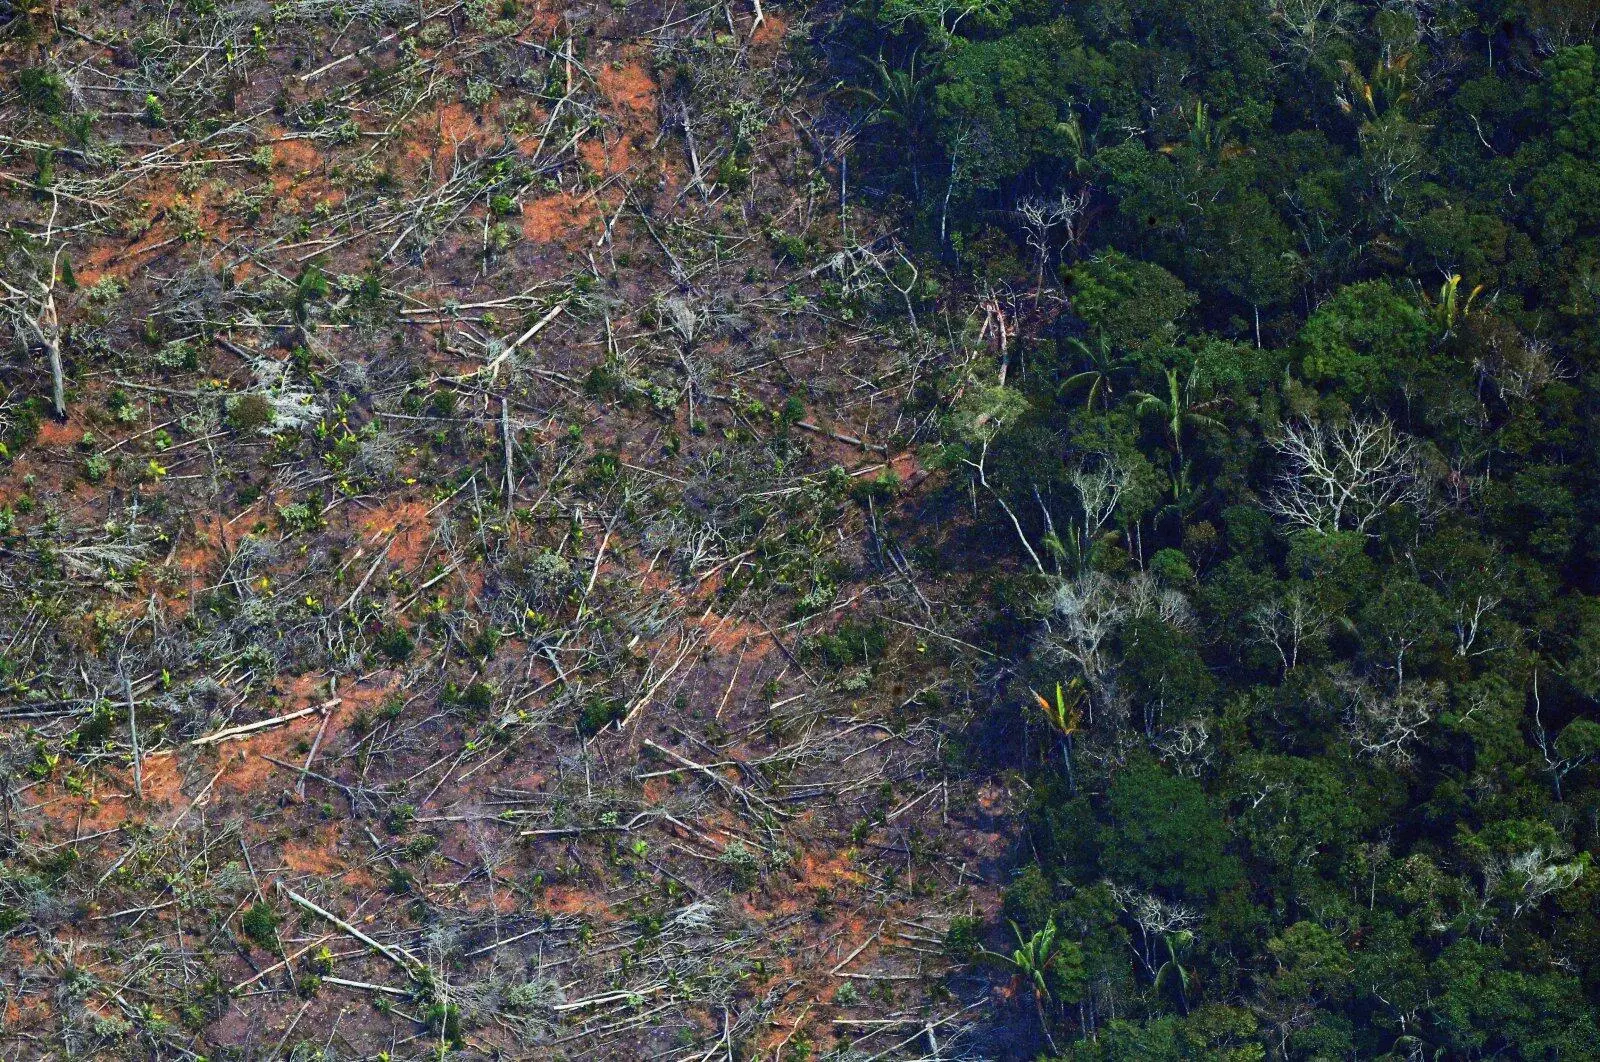 Two-thirds of worlds tropical rainforest destroyed or degraded globally: NGO